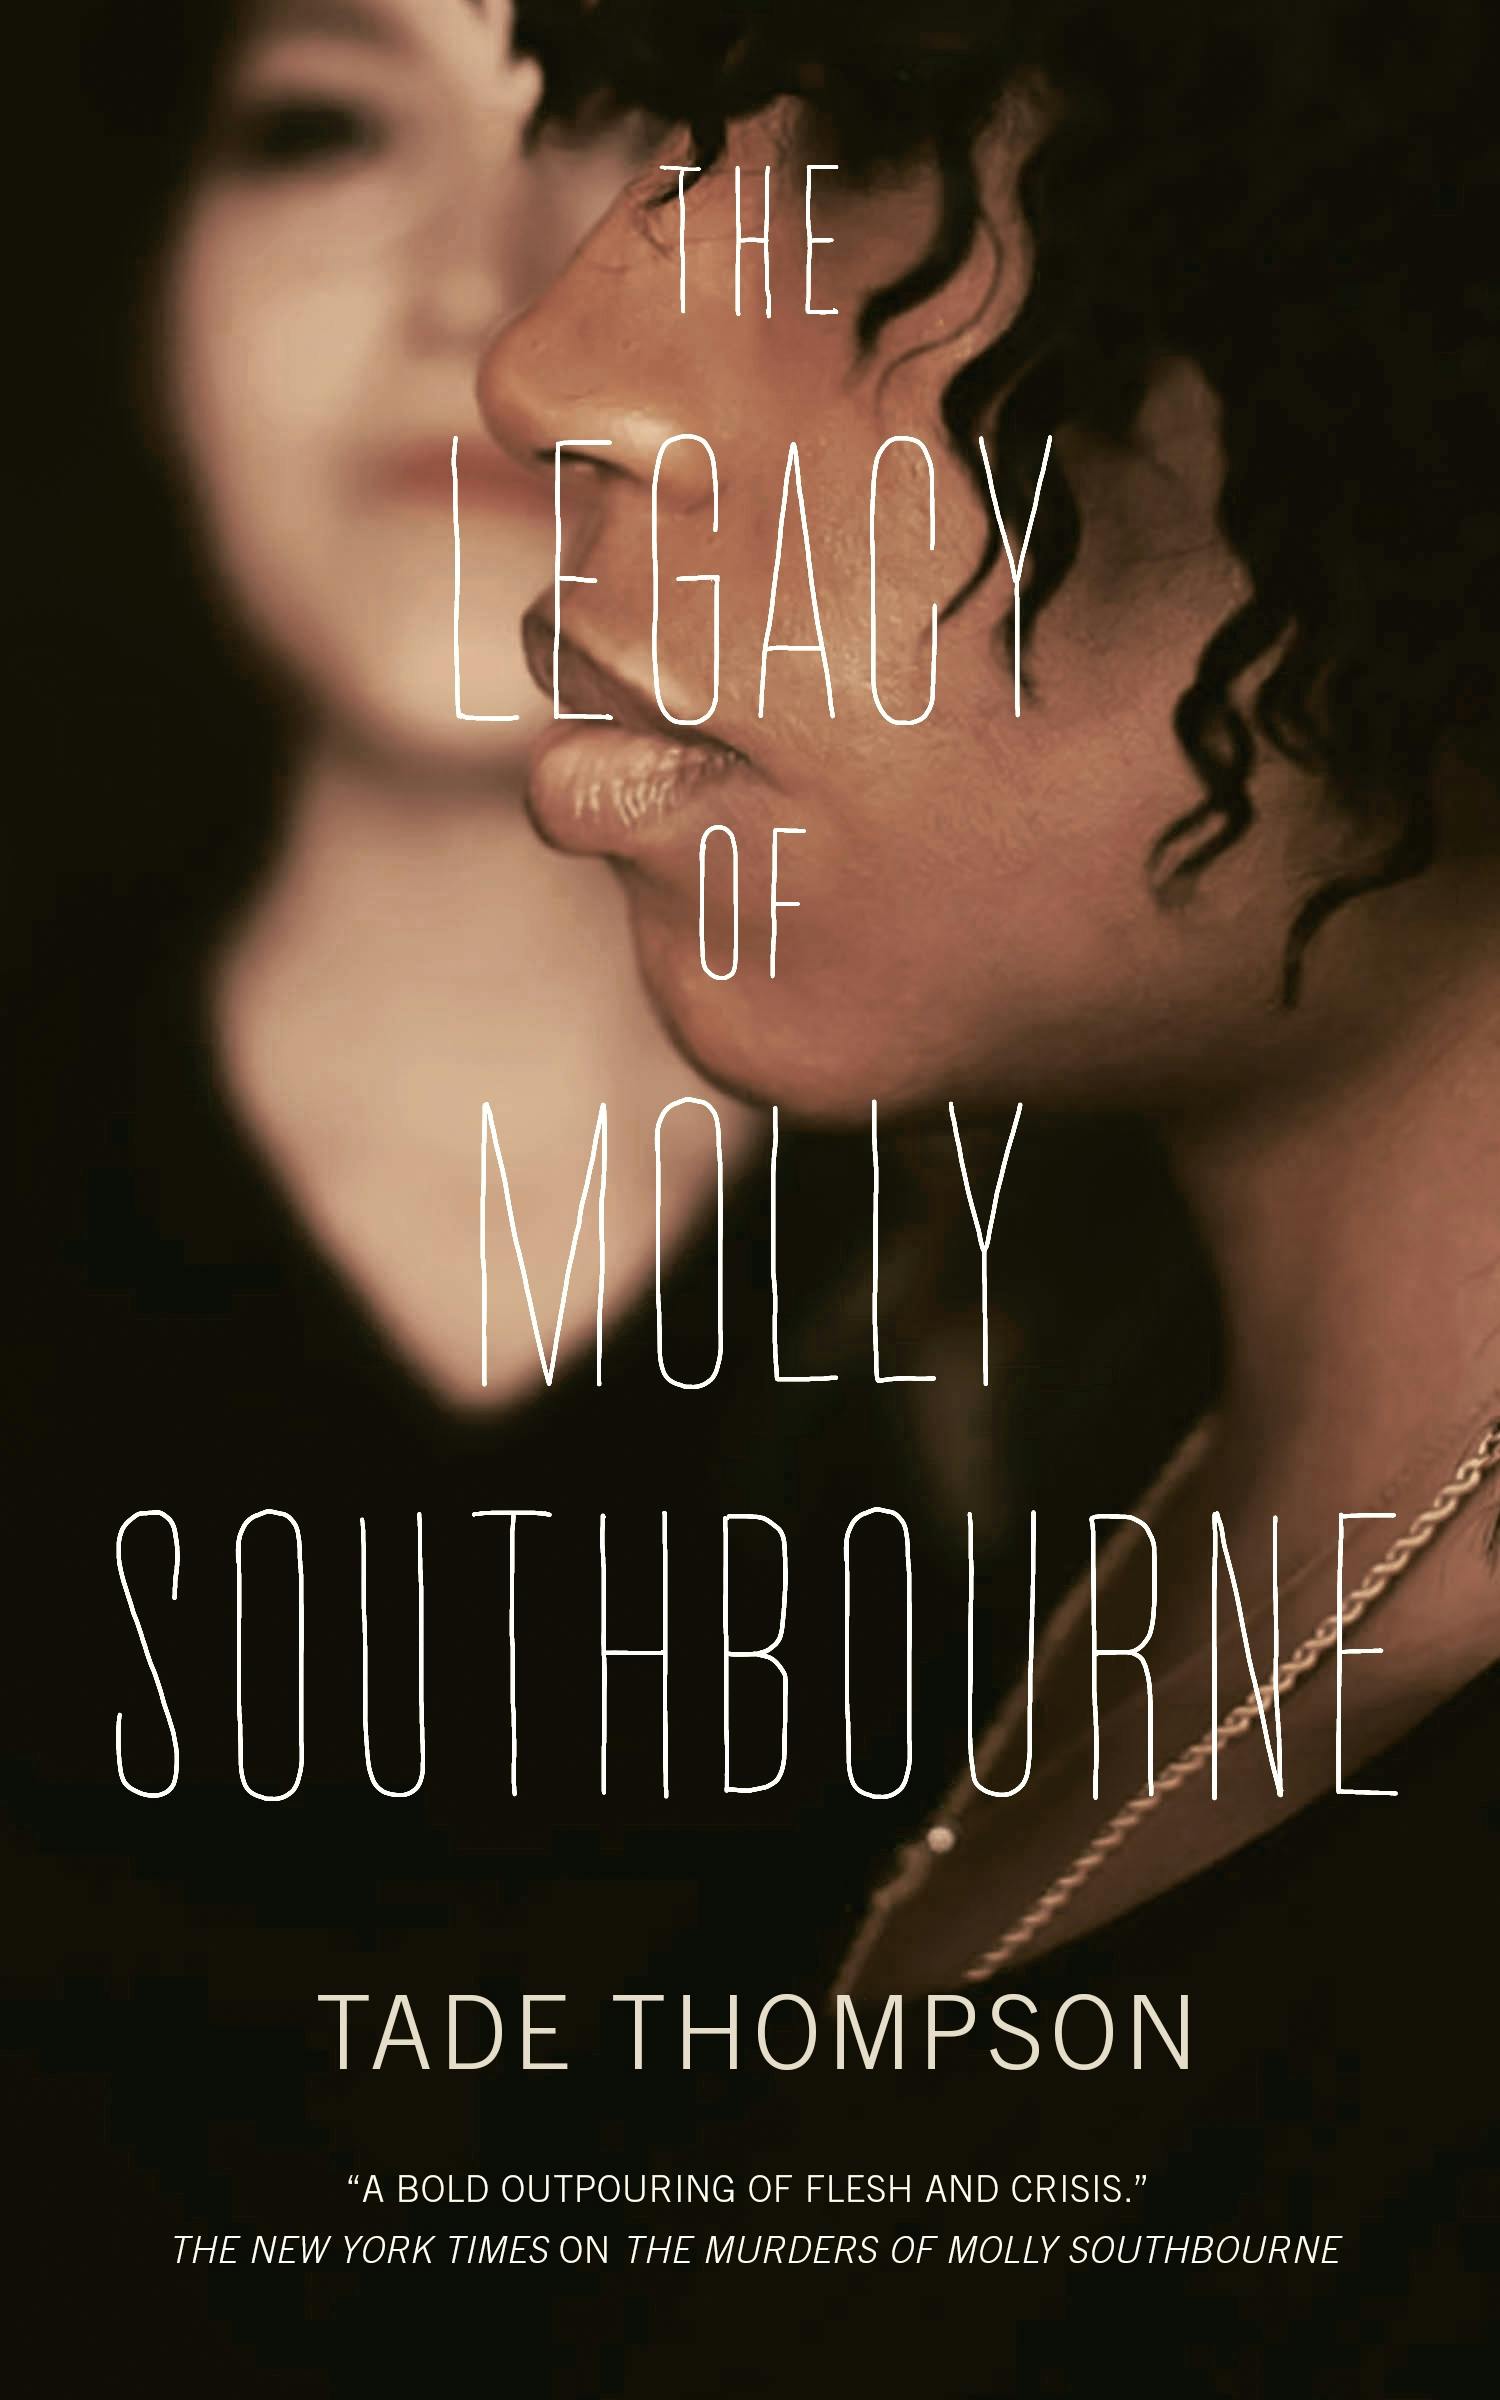 Image of The Legacy of Molly Southbourne